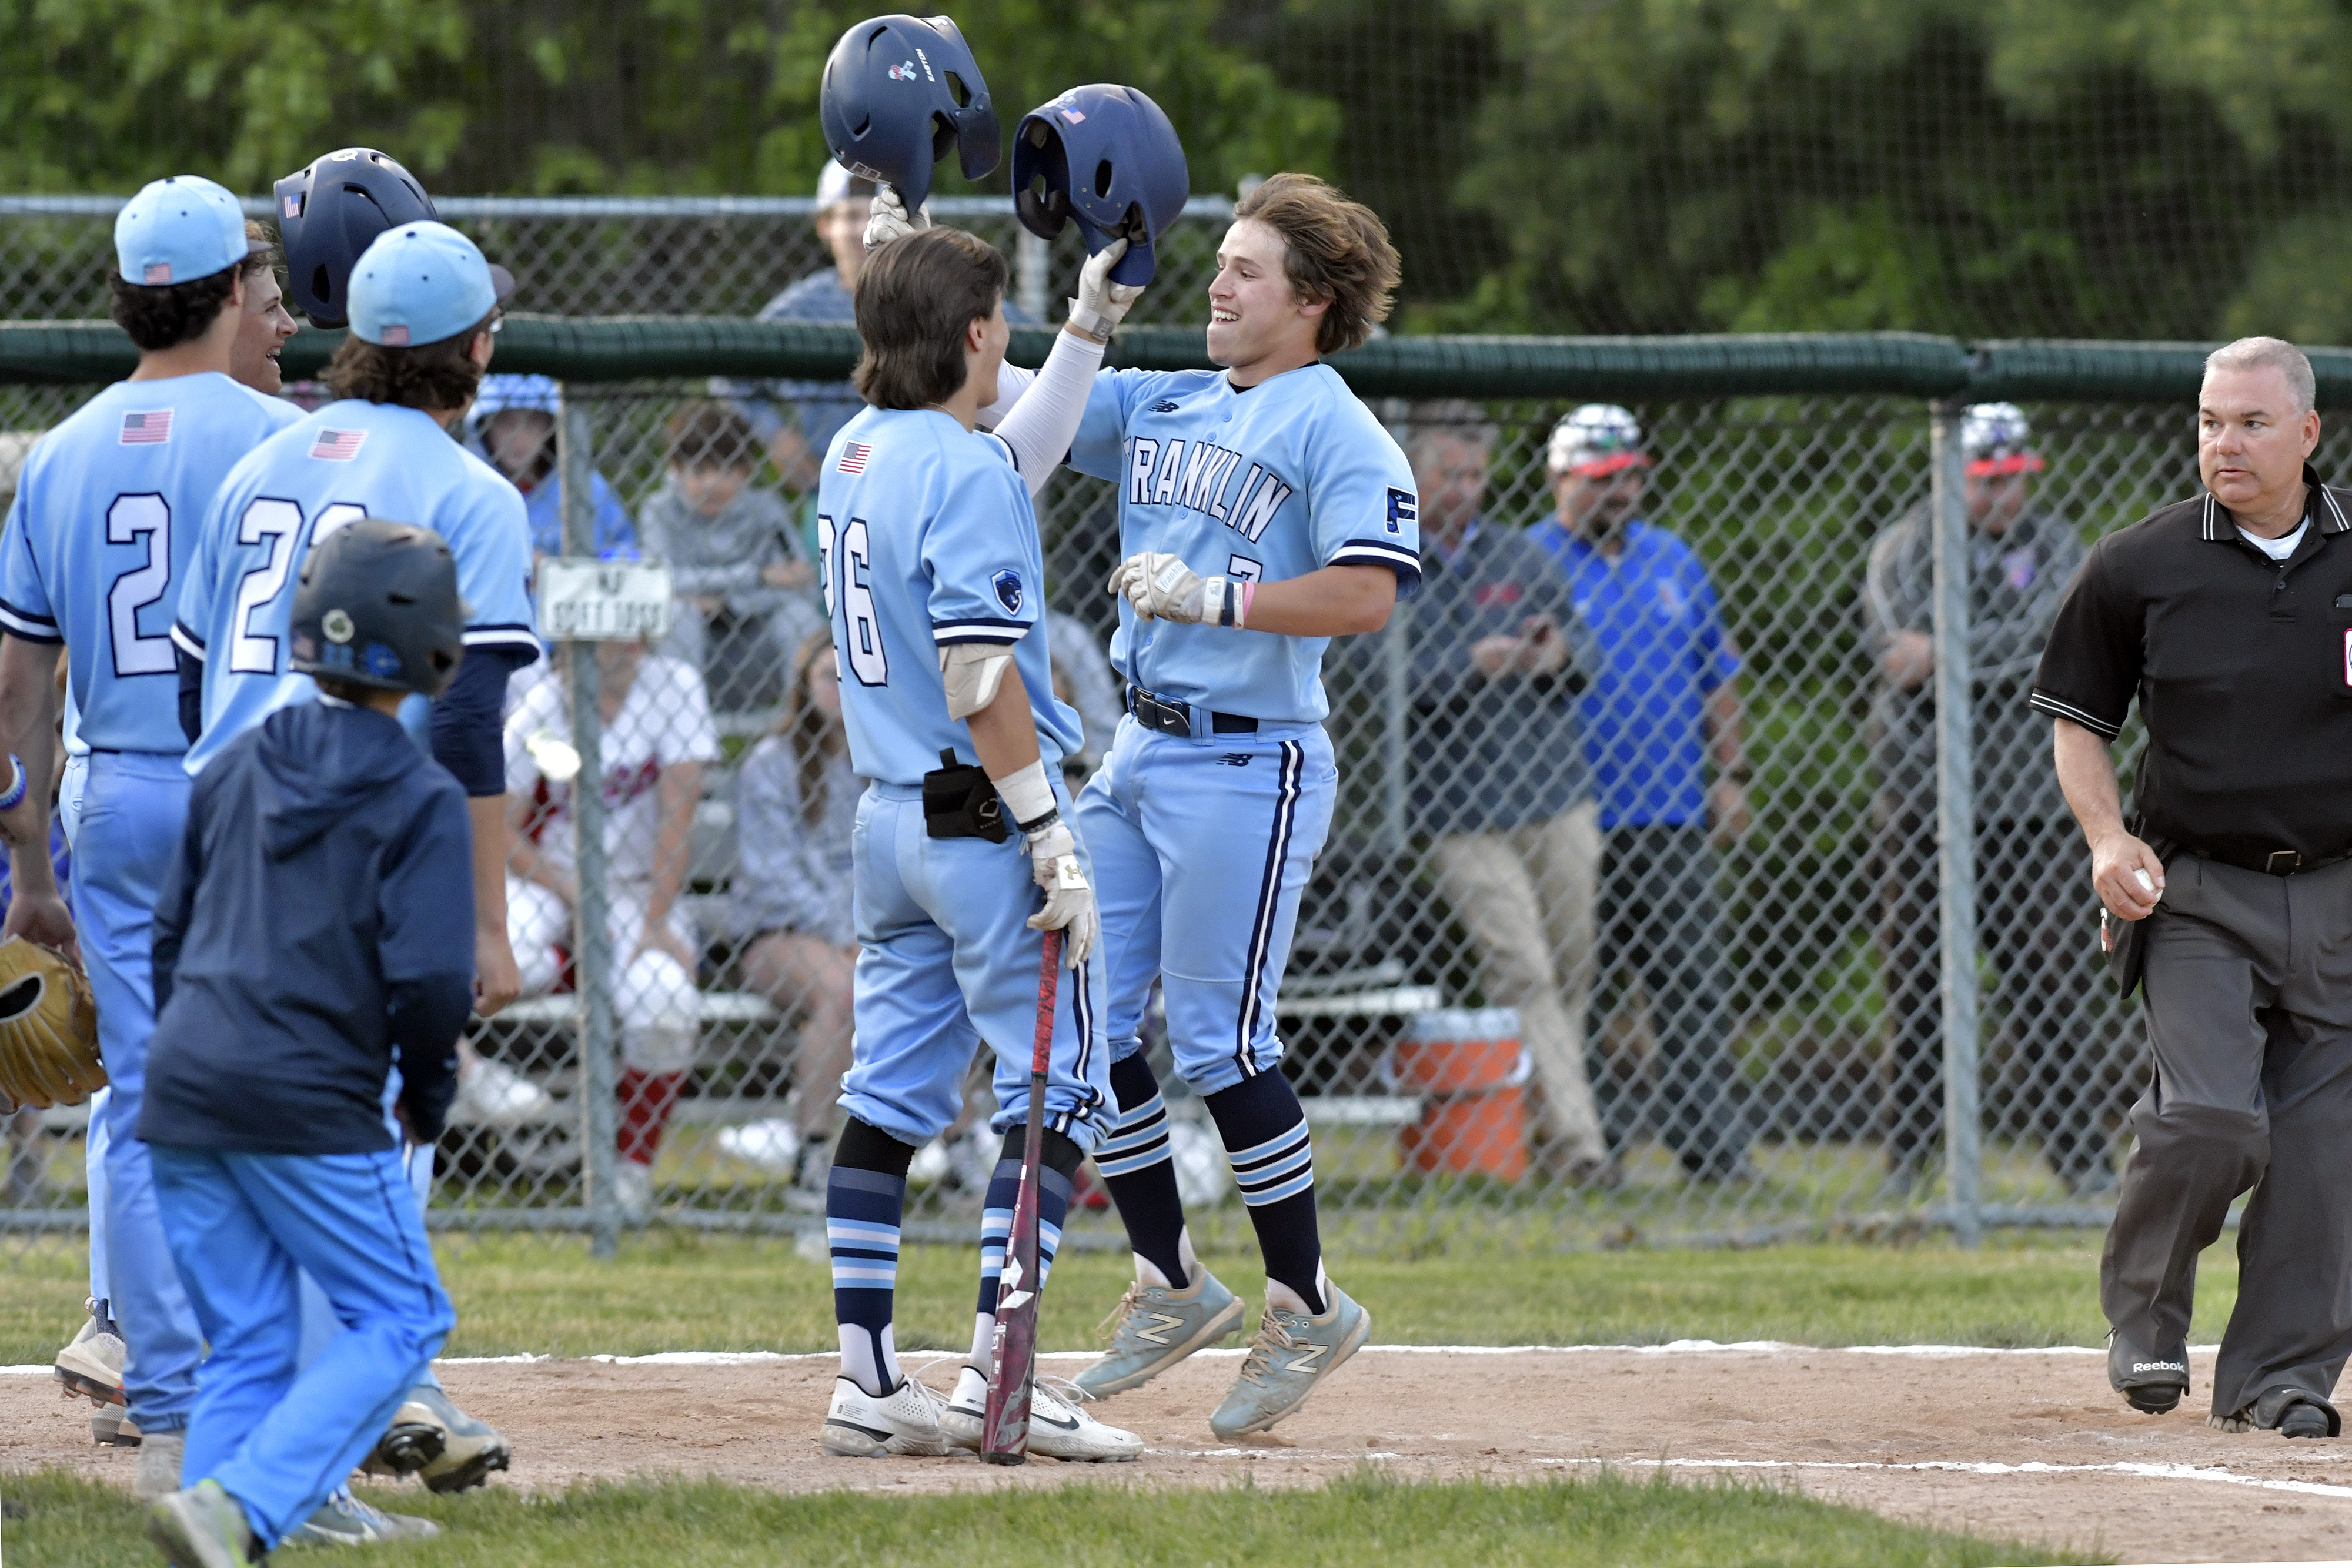 Hopkins Academy baseball takes down top-seeded Georgetown to